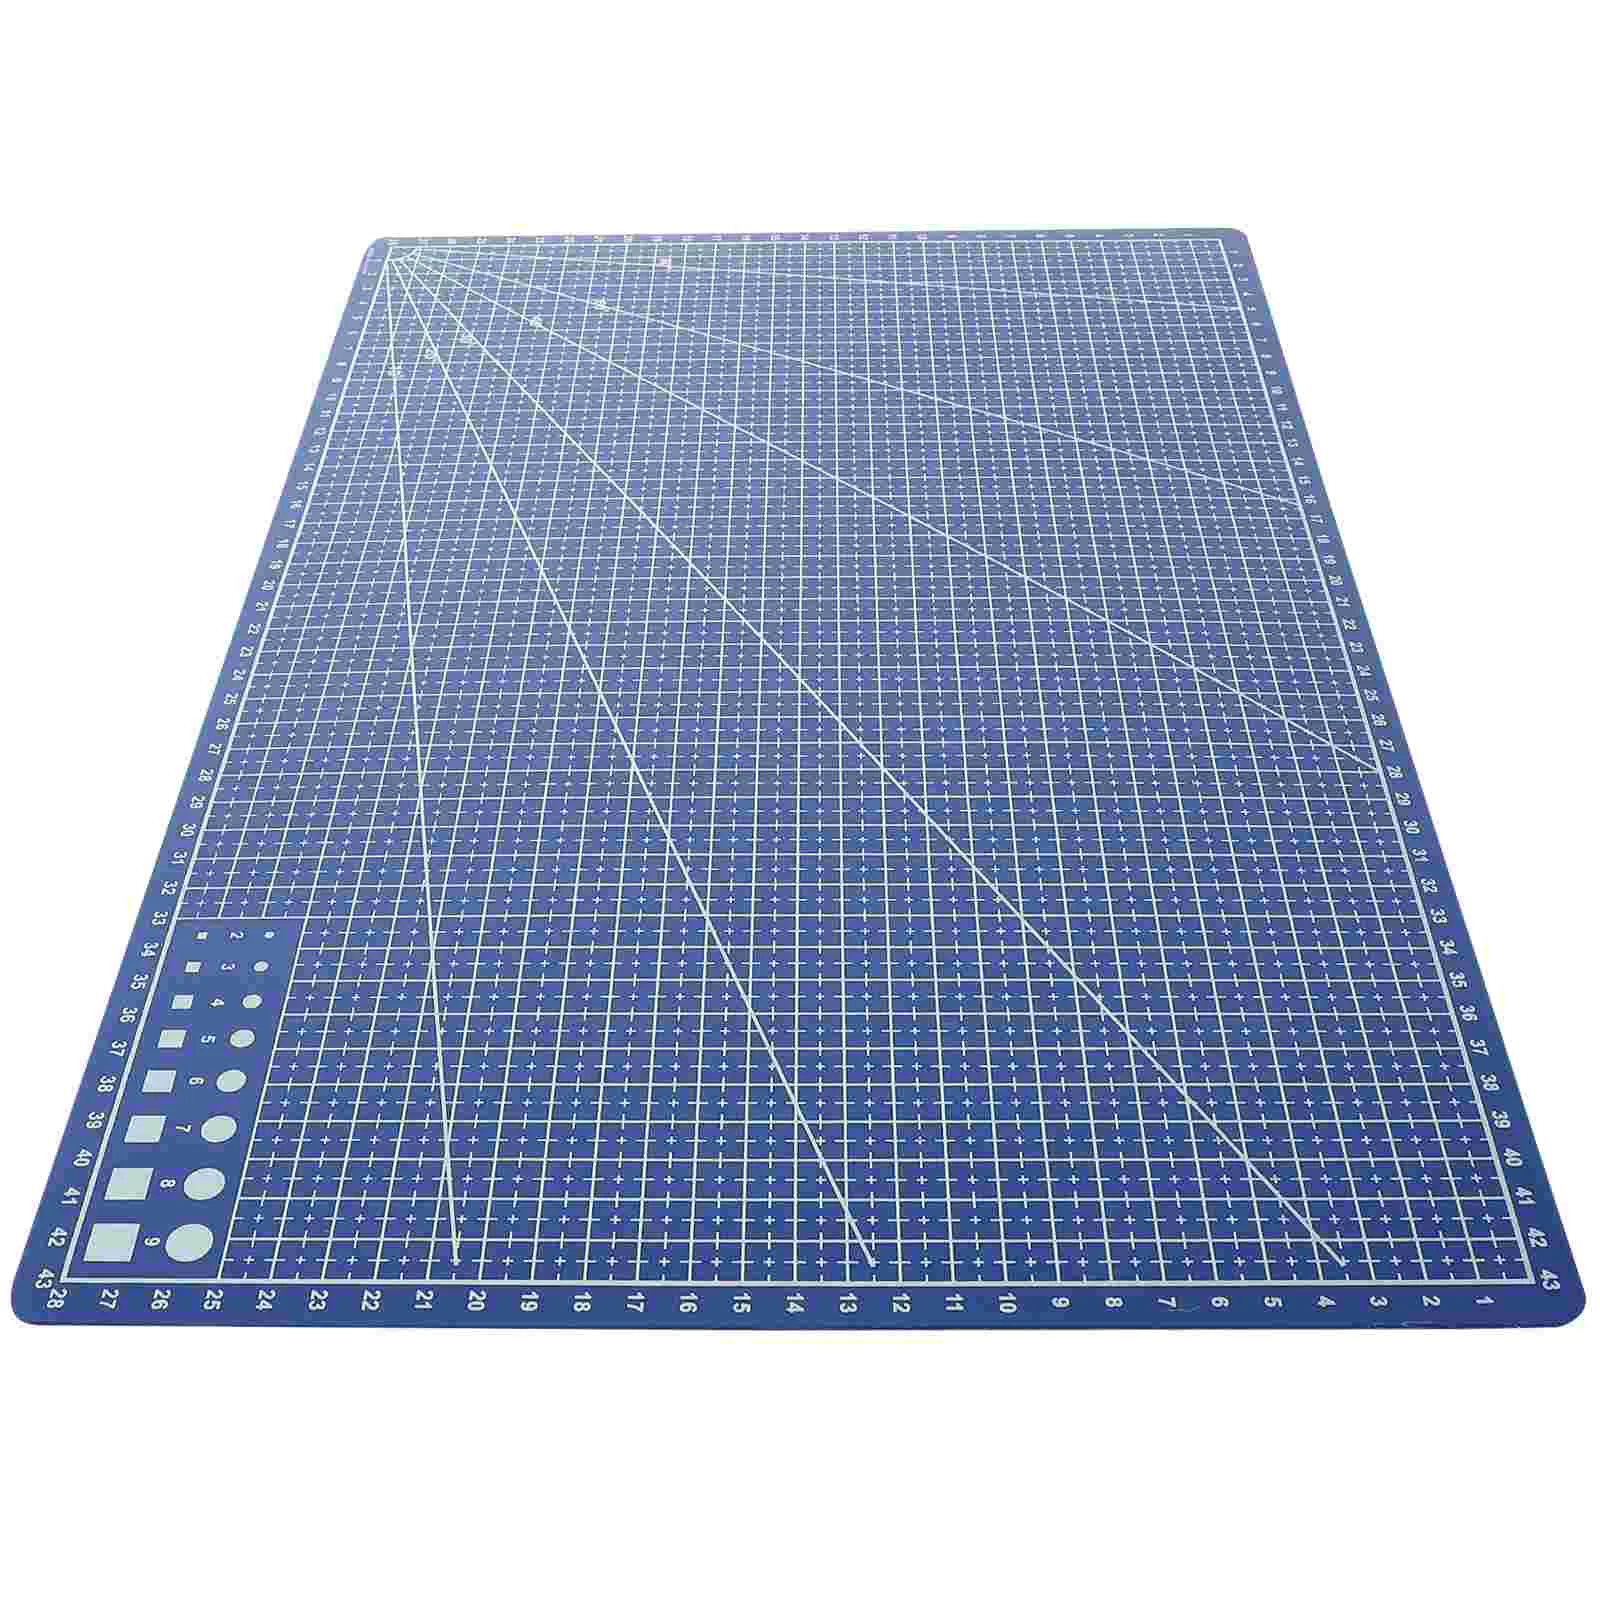 Cutting Mat Mats Board Rotary Self Craft Sewing Pad Engraving Professional Scrapbooking X Pvc Sided Double Fabric Pp Quilting